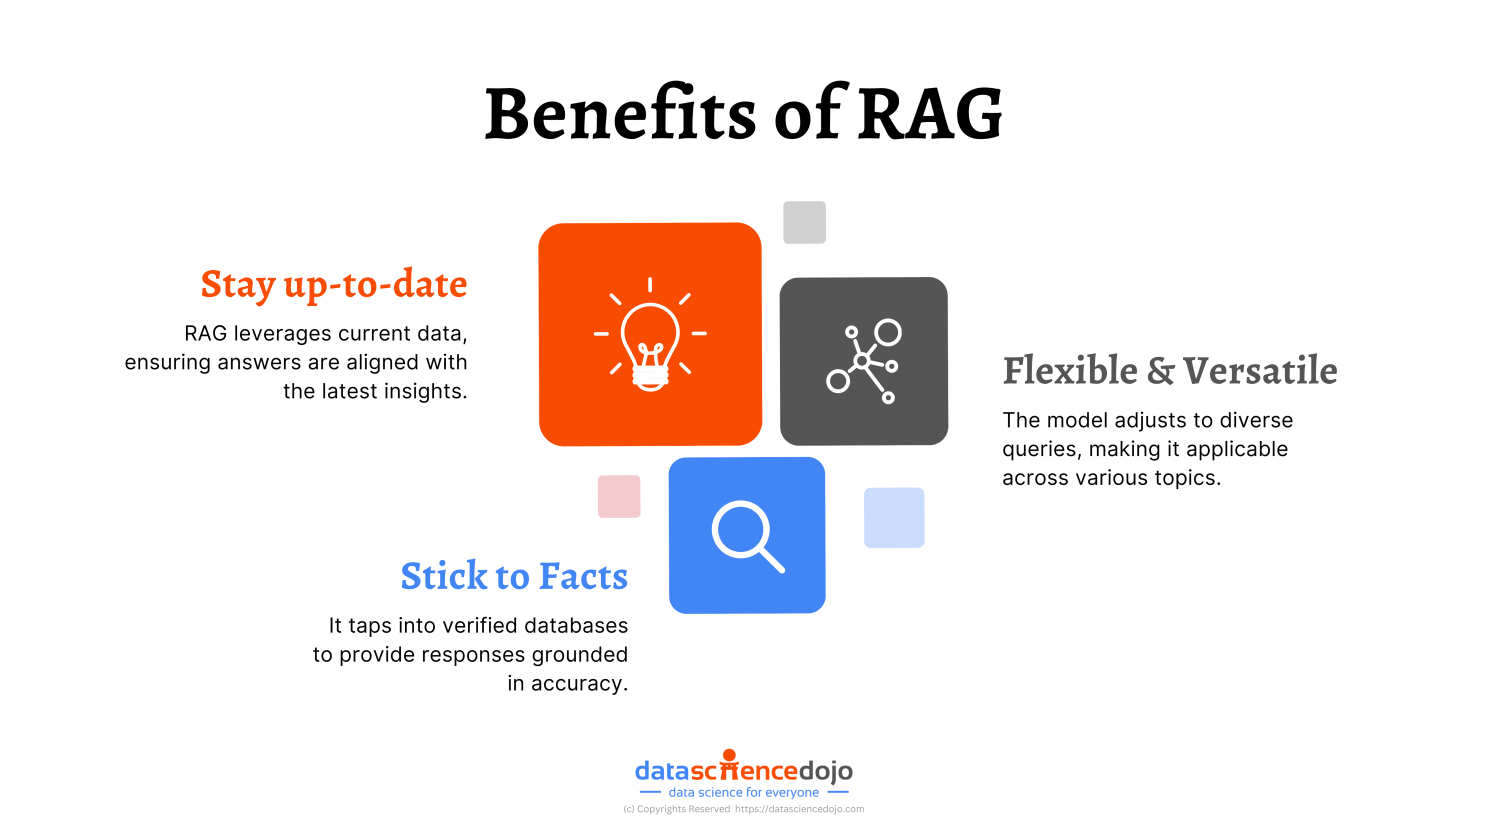 An infographic that shows 3 benefits of retrieval augmented generation i.e. LLM RAG